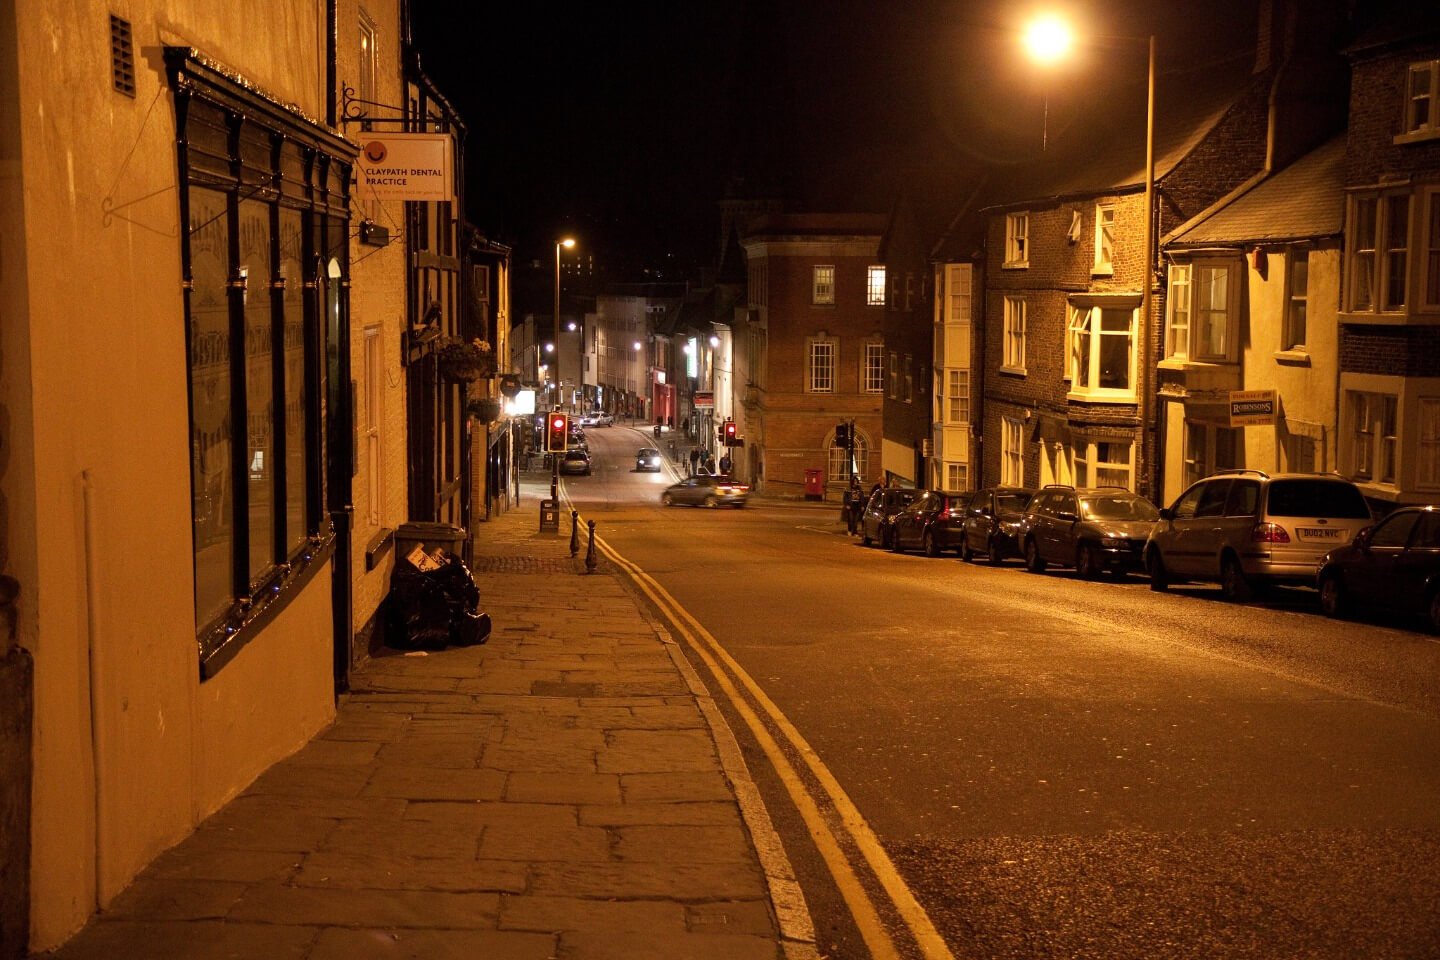 Student Accommodation in Claypath, Durham - view down the highstreet at night